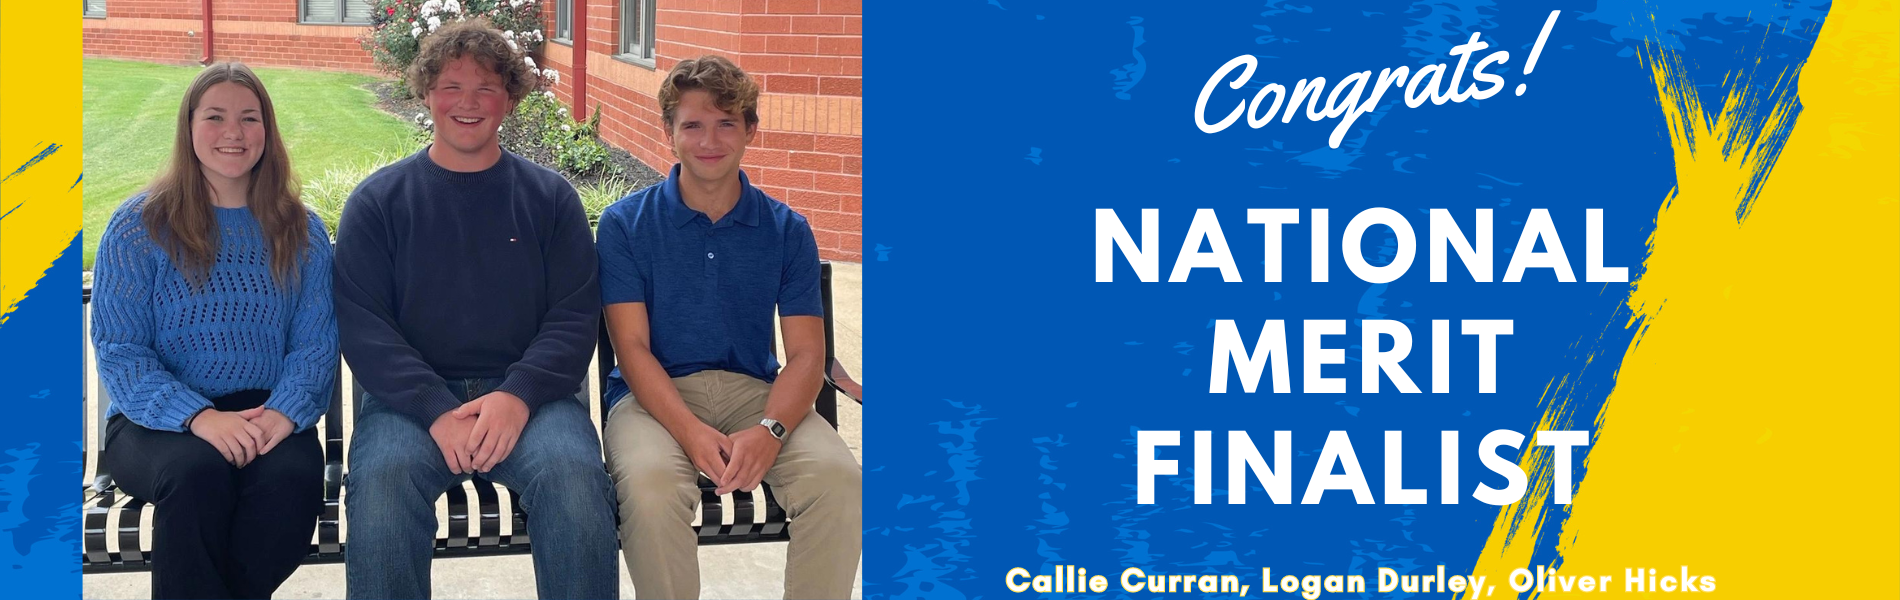 Congratulations to the OBHS National Merit Finalist